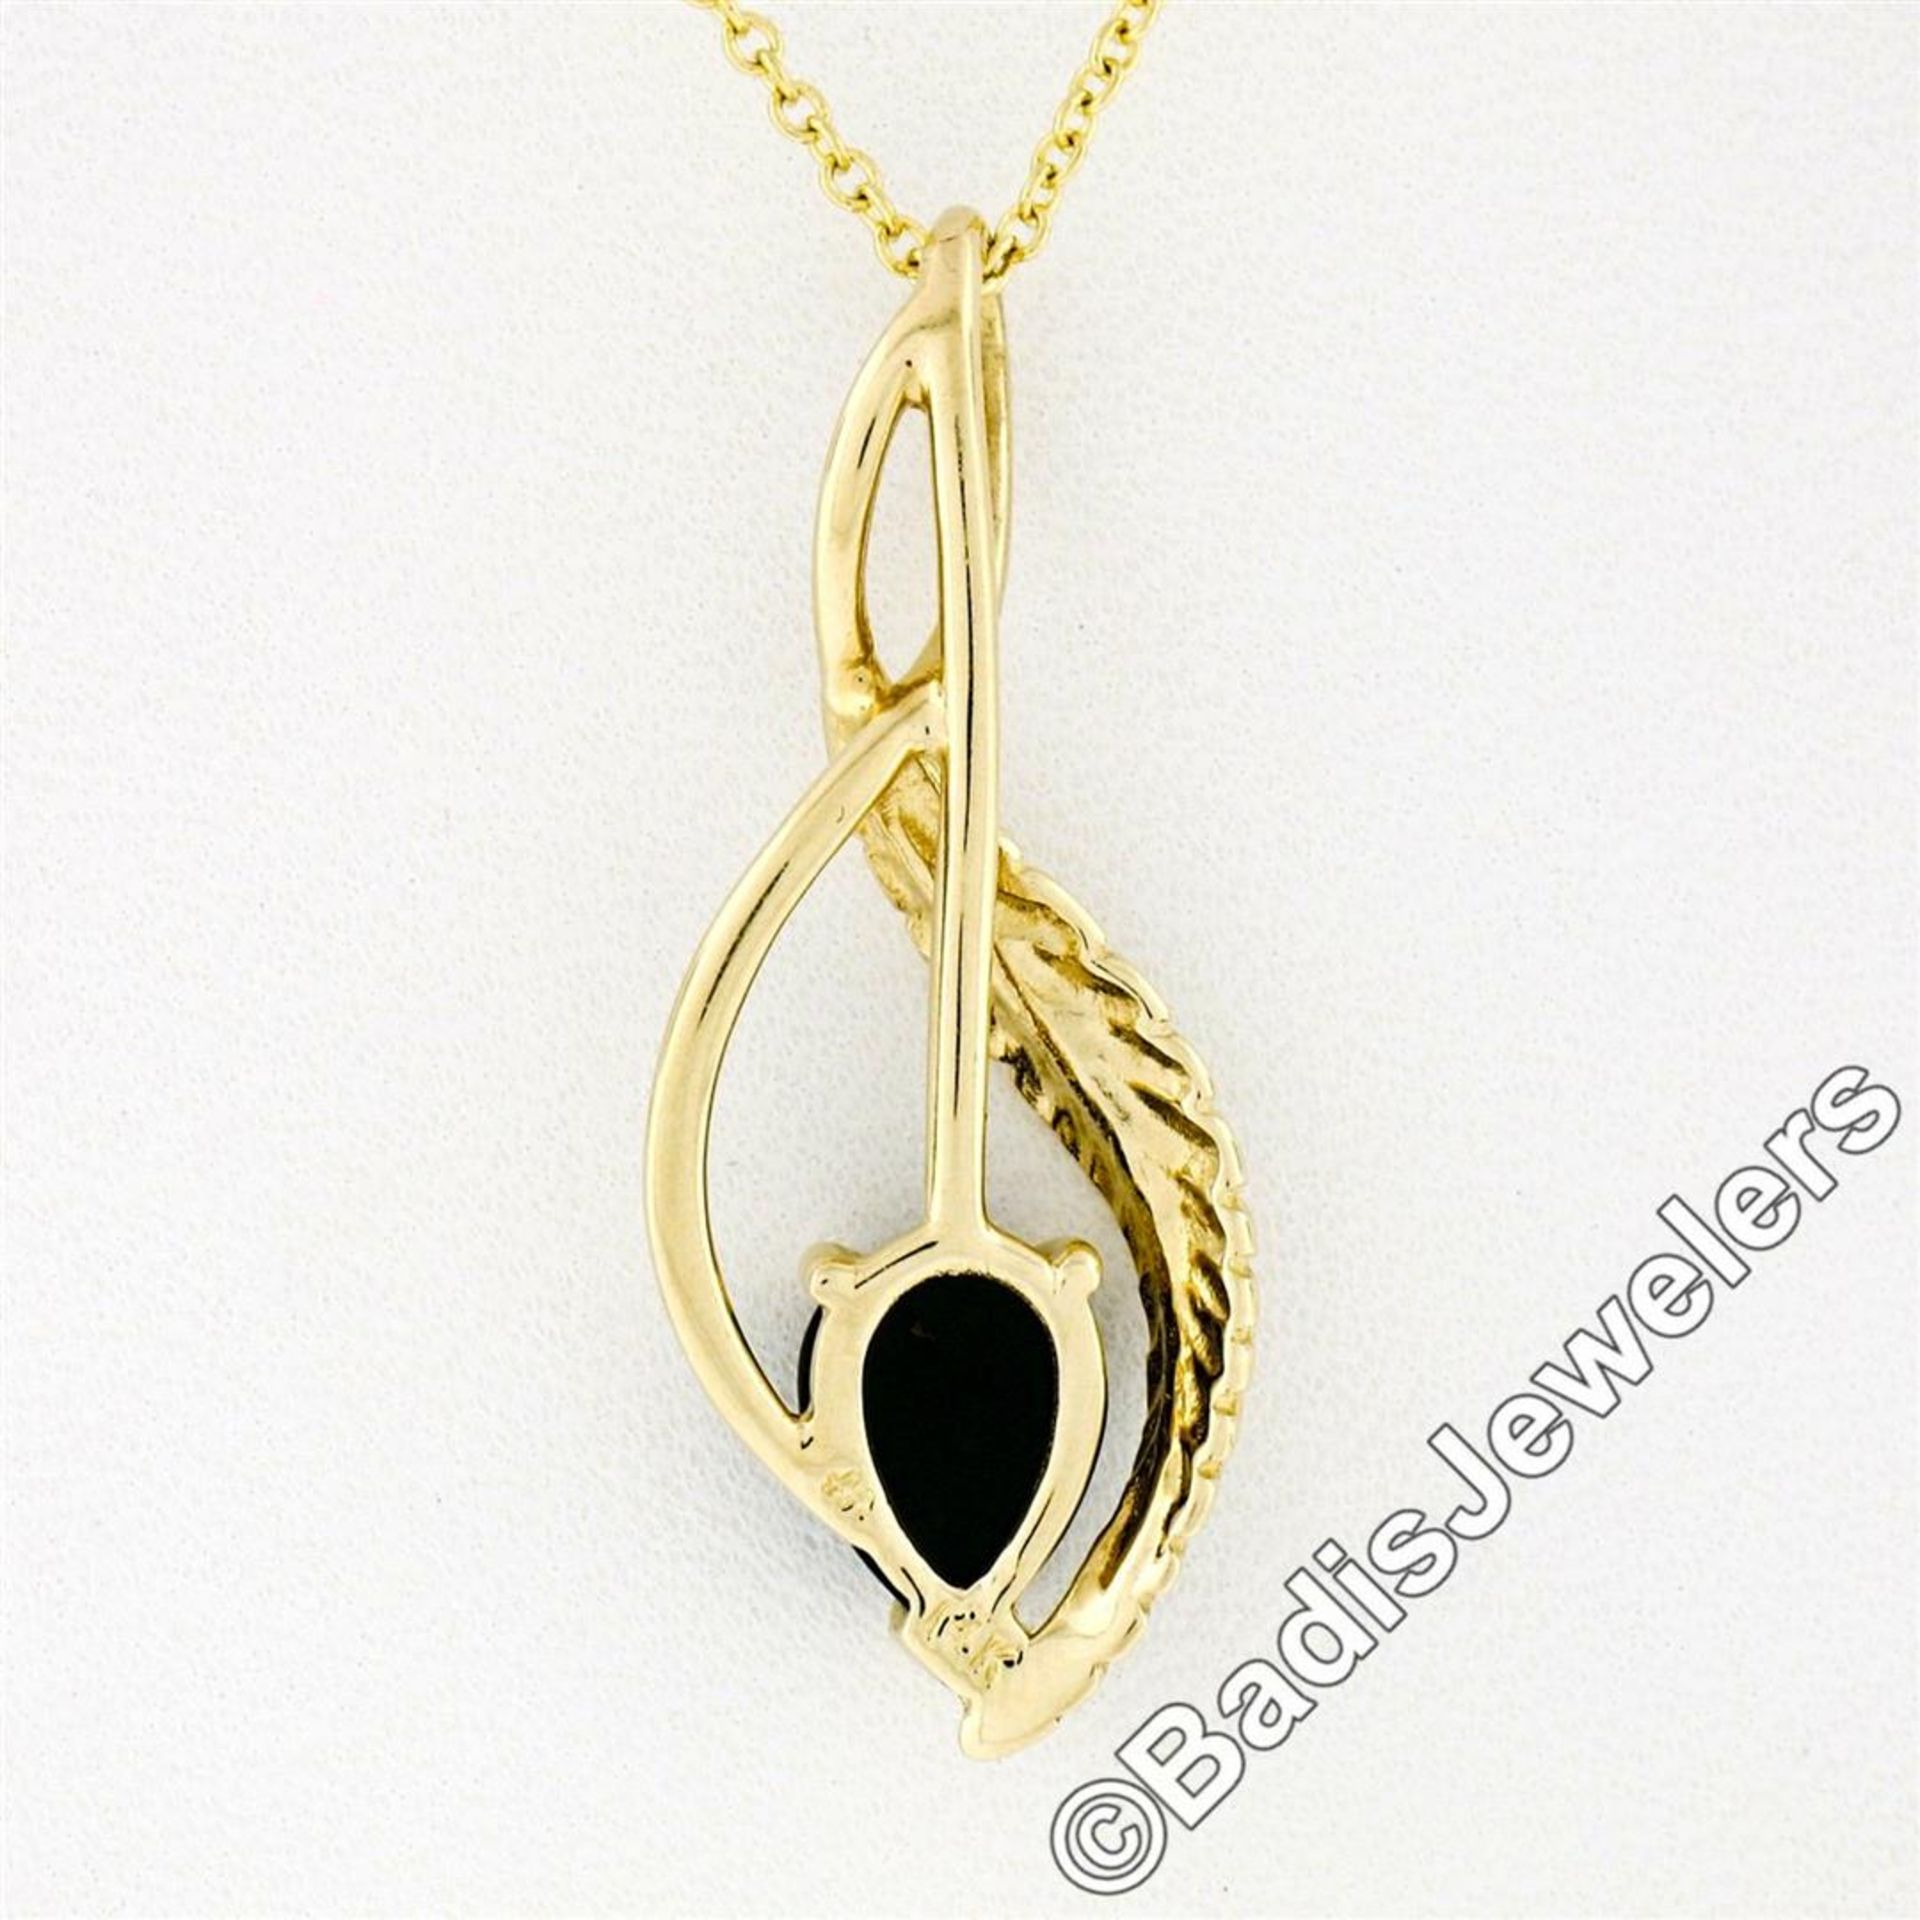 14kt Yellow Gold Pear Cabochon Black Onyx Open Pendant Necklace - Image 6 of 7